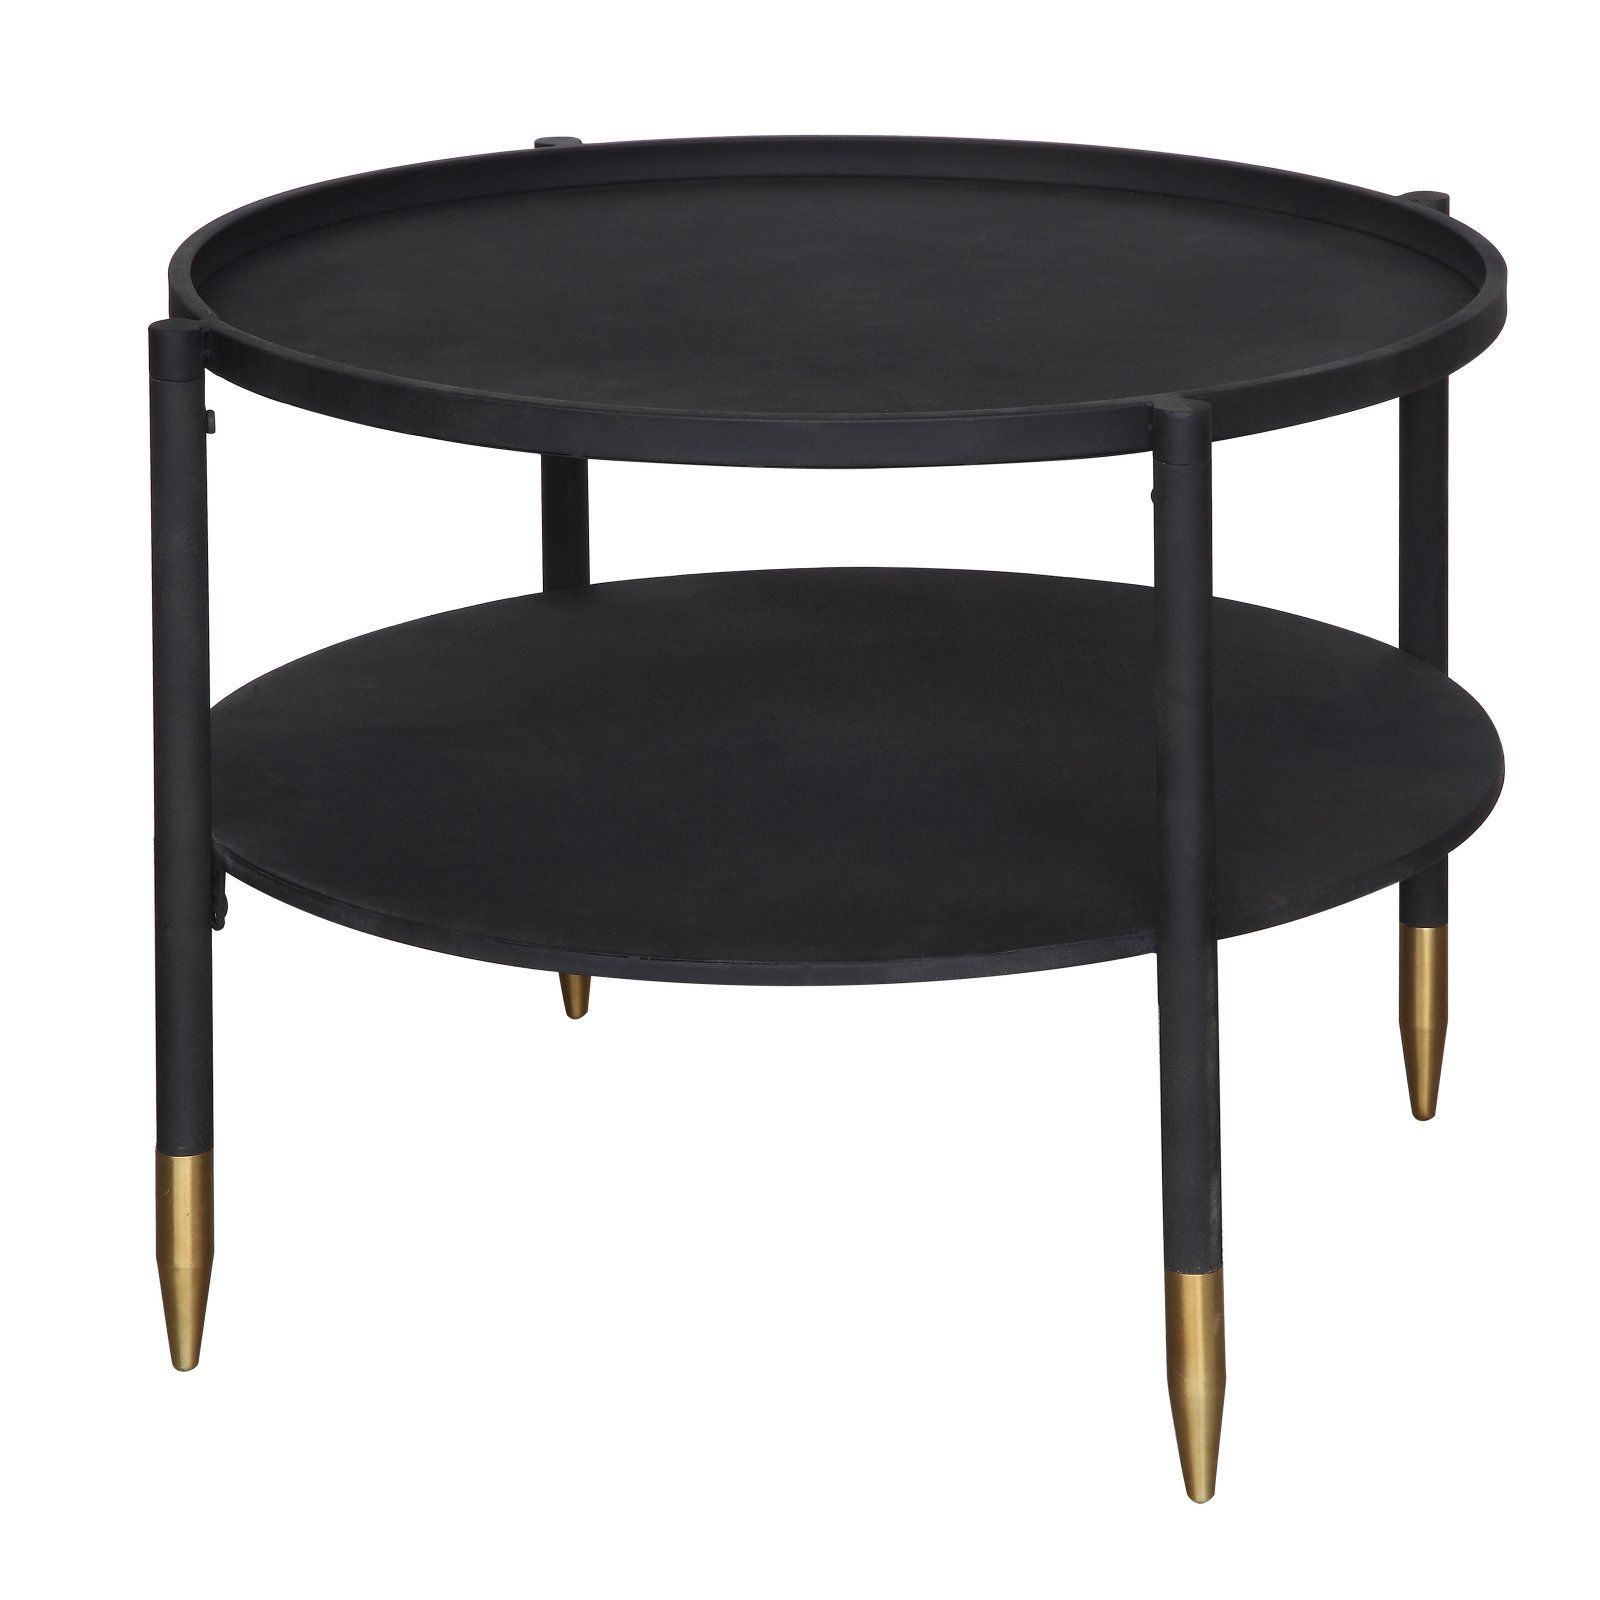 Sprinkle &  Bloom Round 2 Tier Black Metal Coffee Table with Gold Feet ...